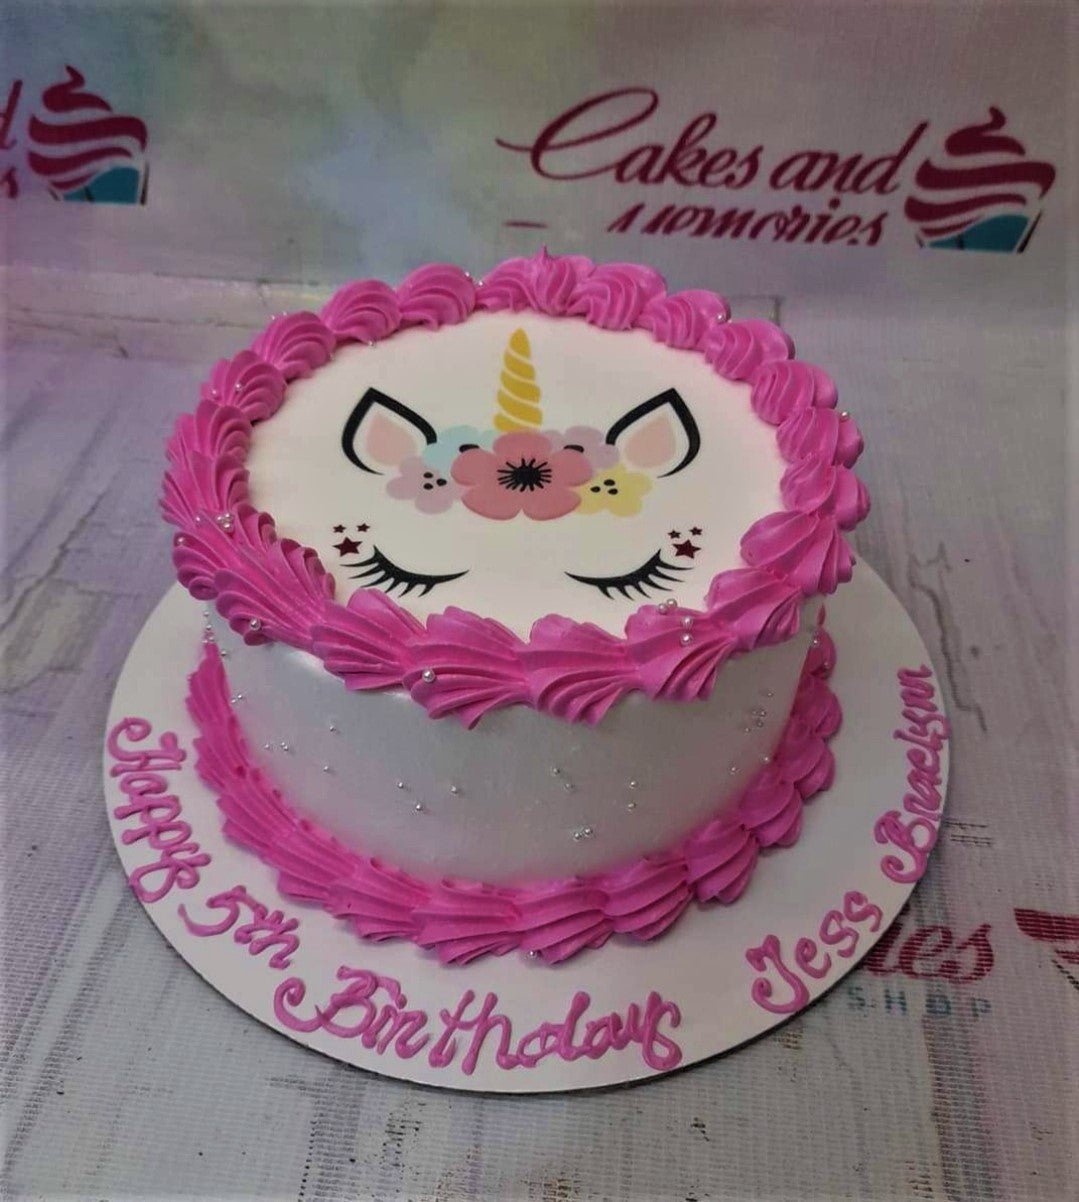 Unicorn Cake Designs for Your Theme Party | Sestra's Kitchen